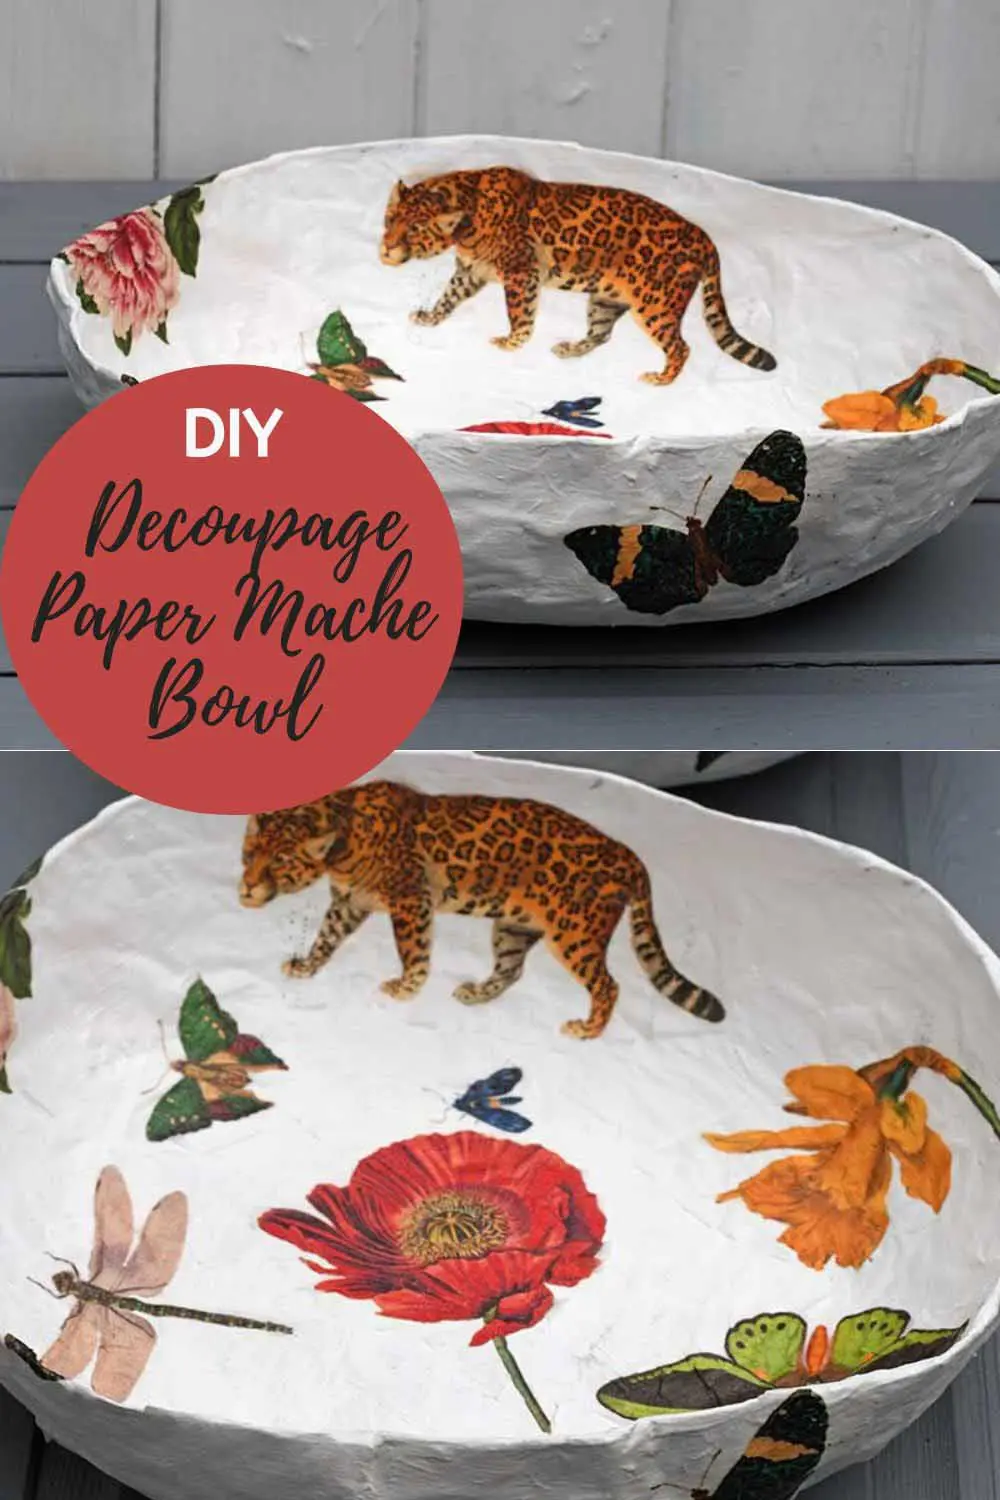 How to Make paper mache bowls